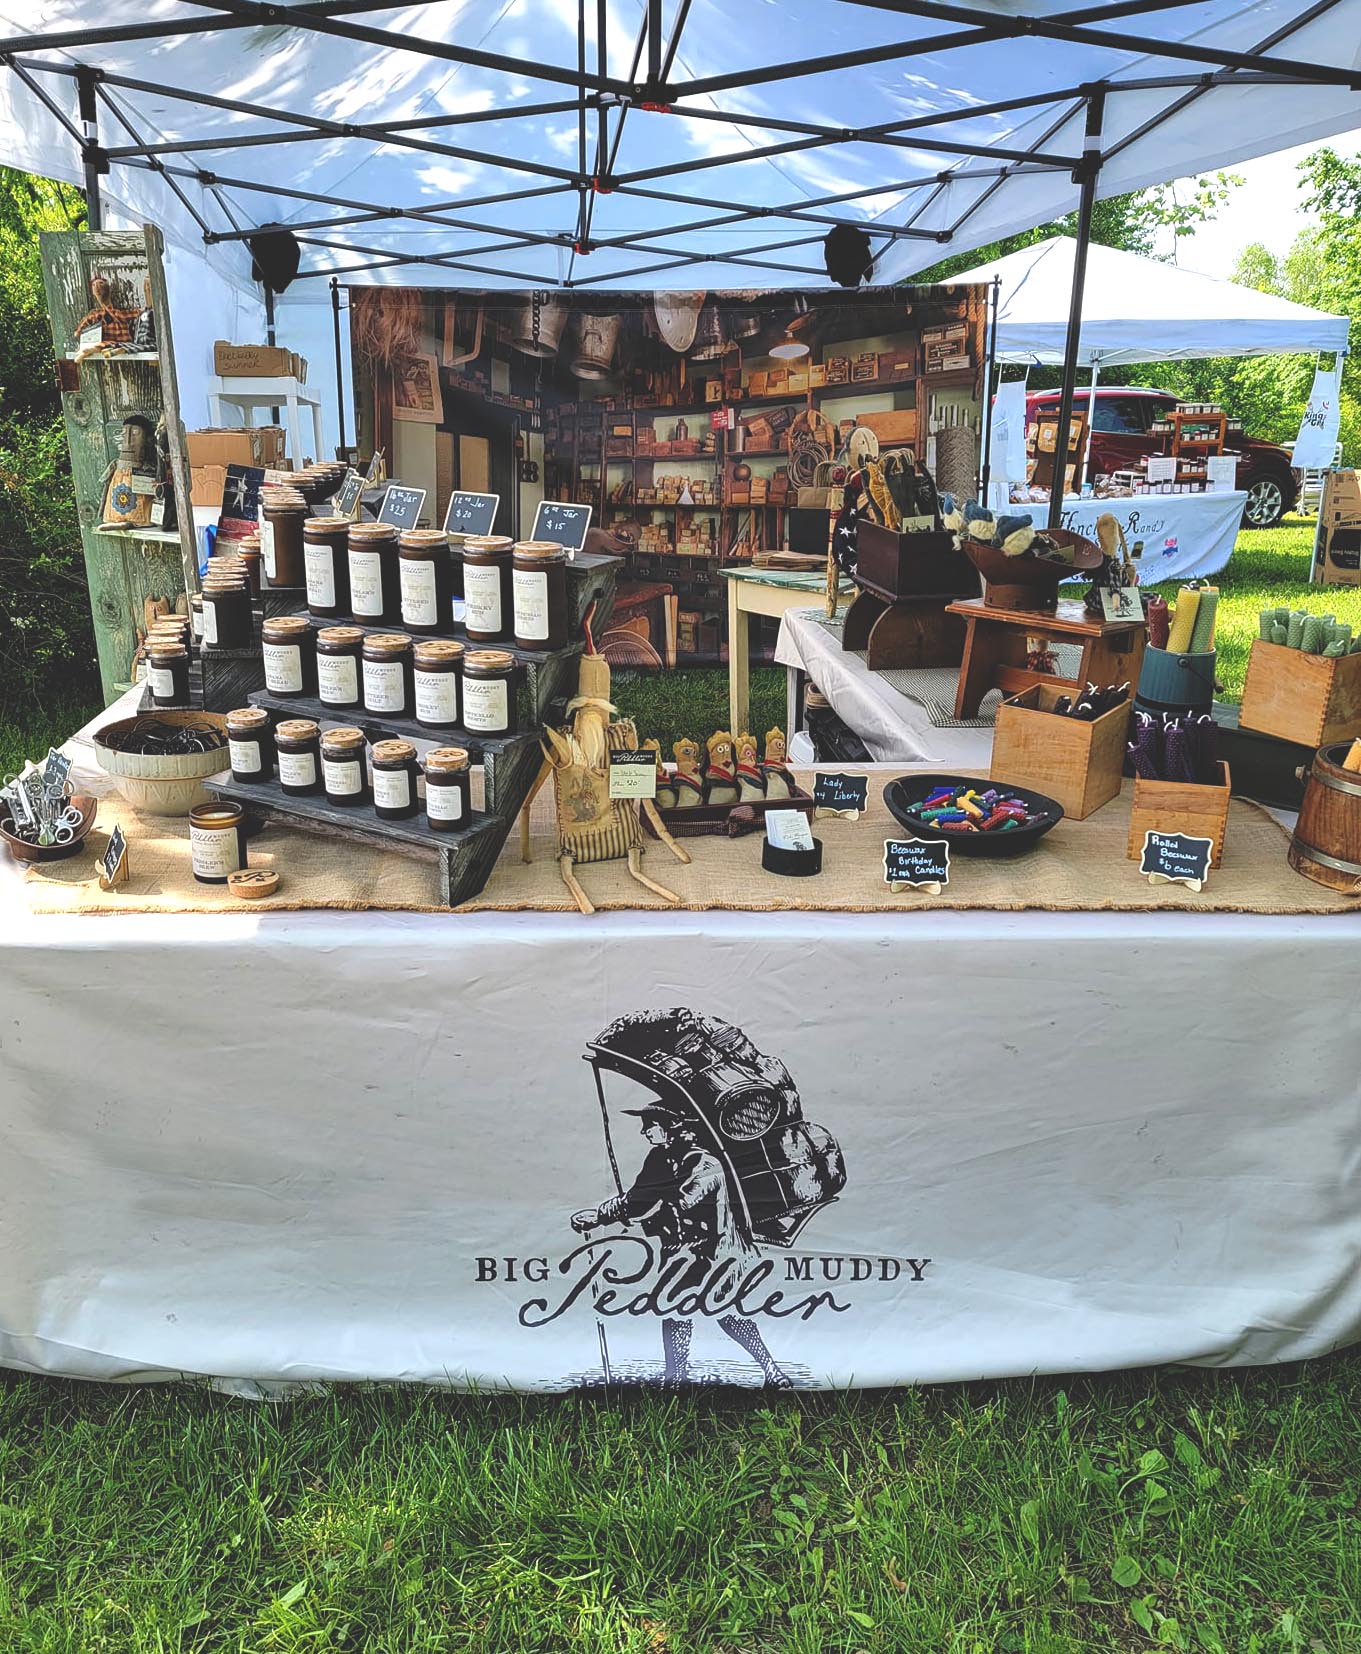 Big Muddy Peddler set up with tent selling products